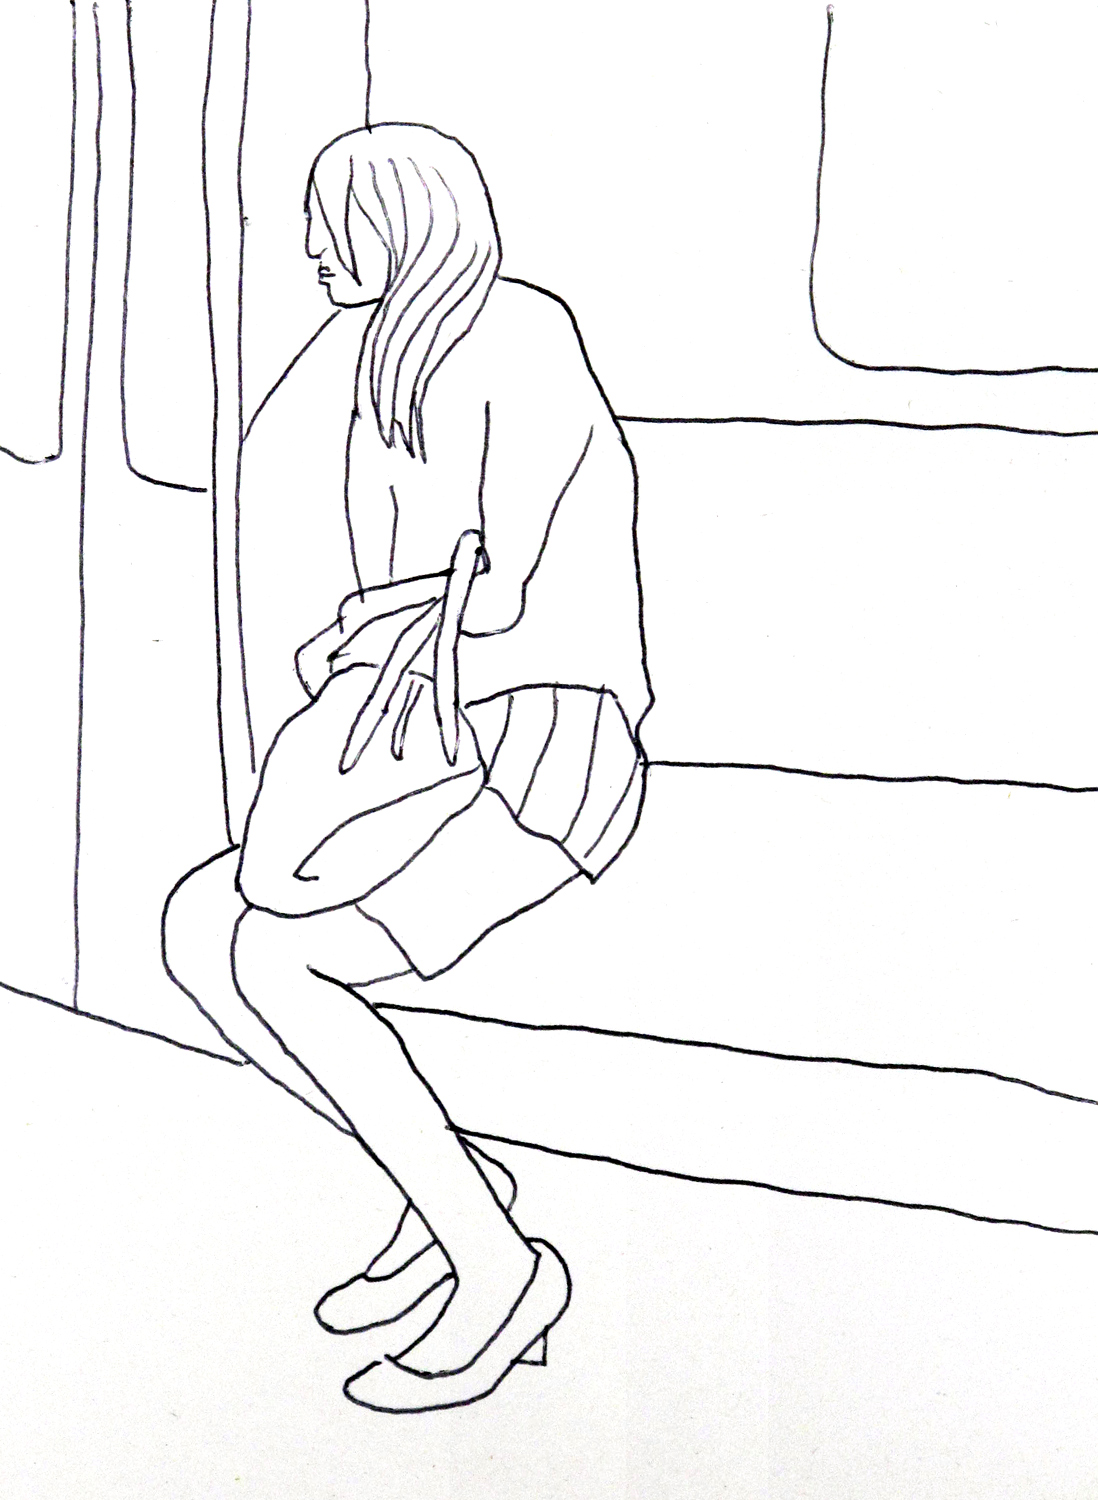 Sketch made on a Tokyo Train.